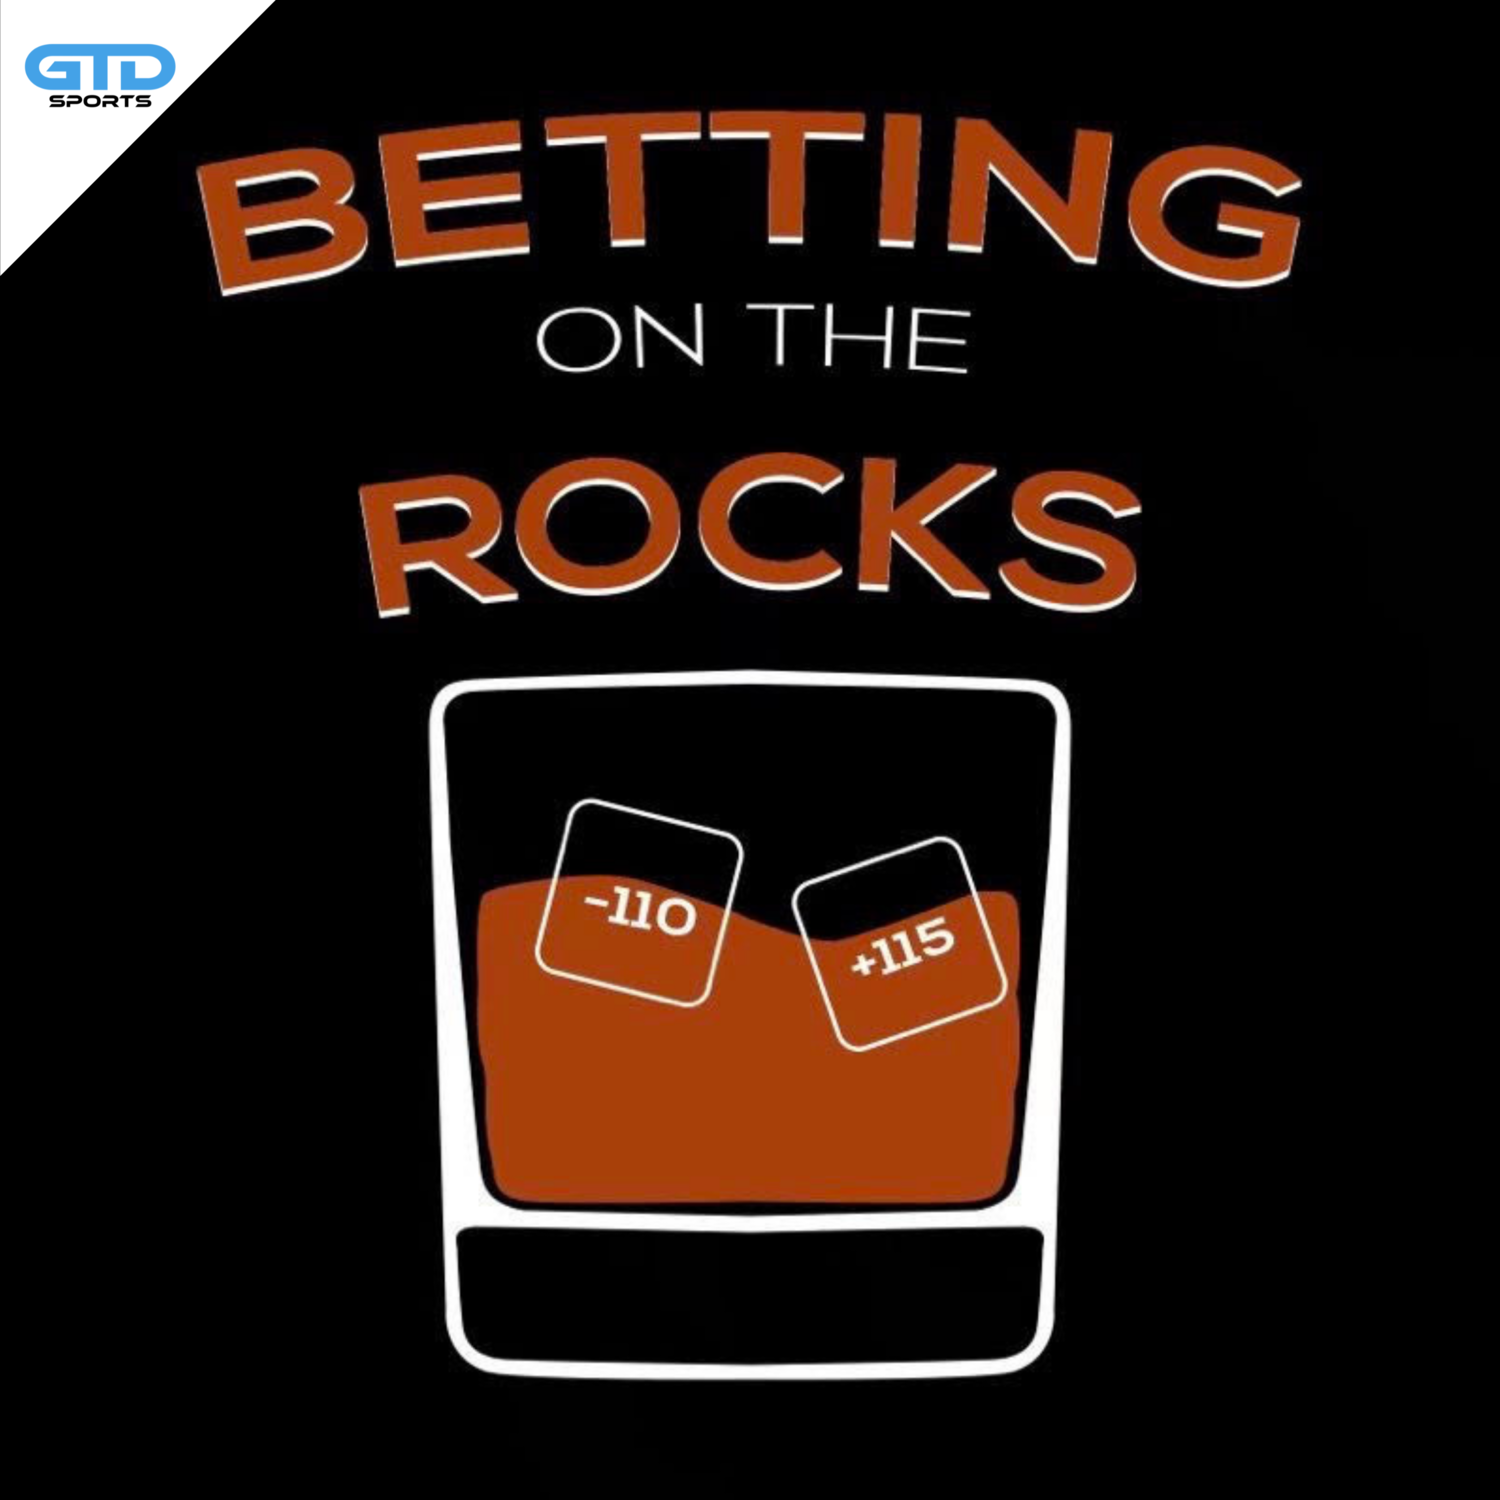 Betting on the Rocks